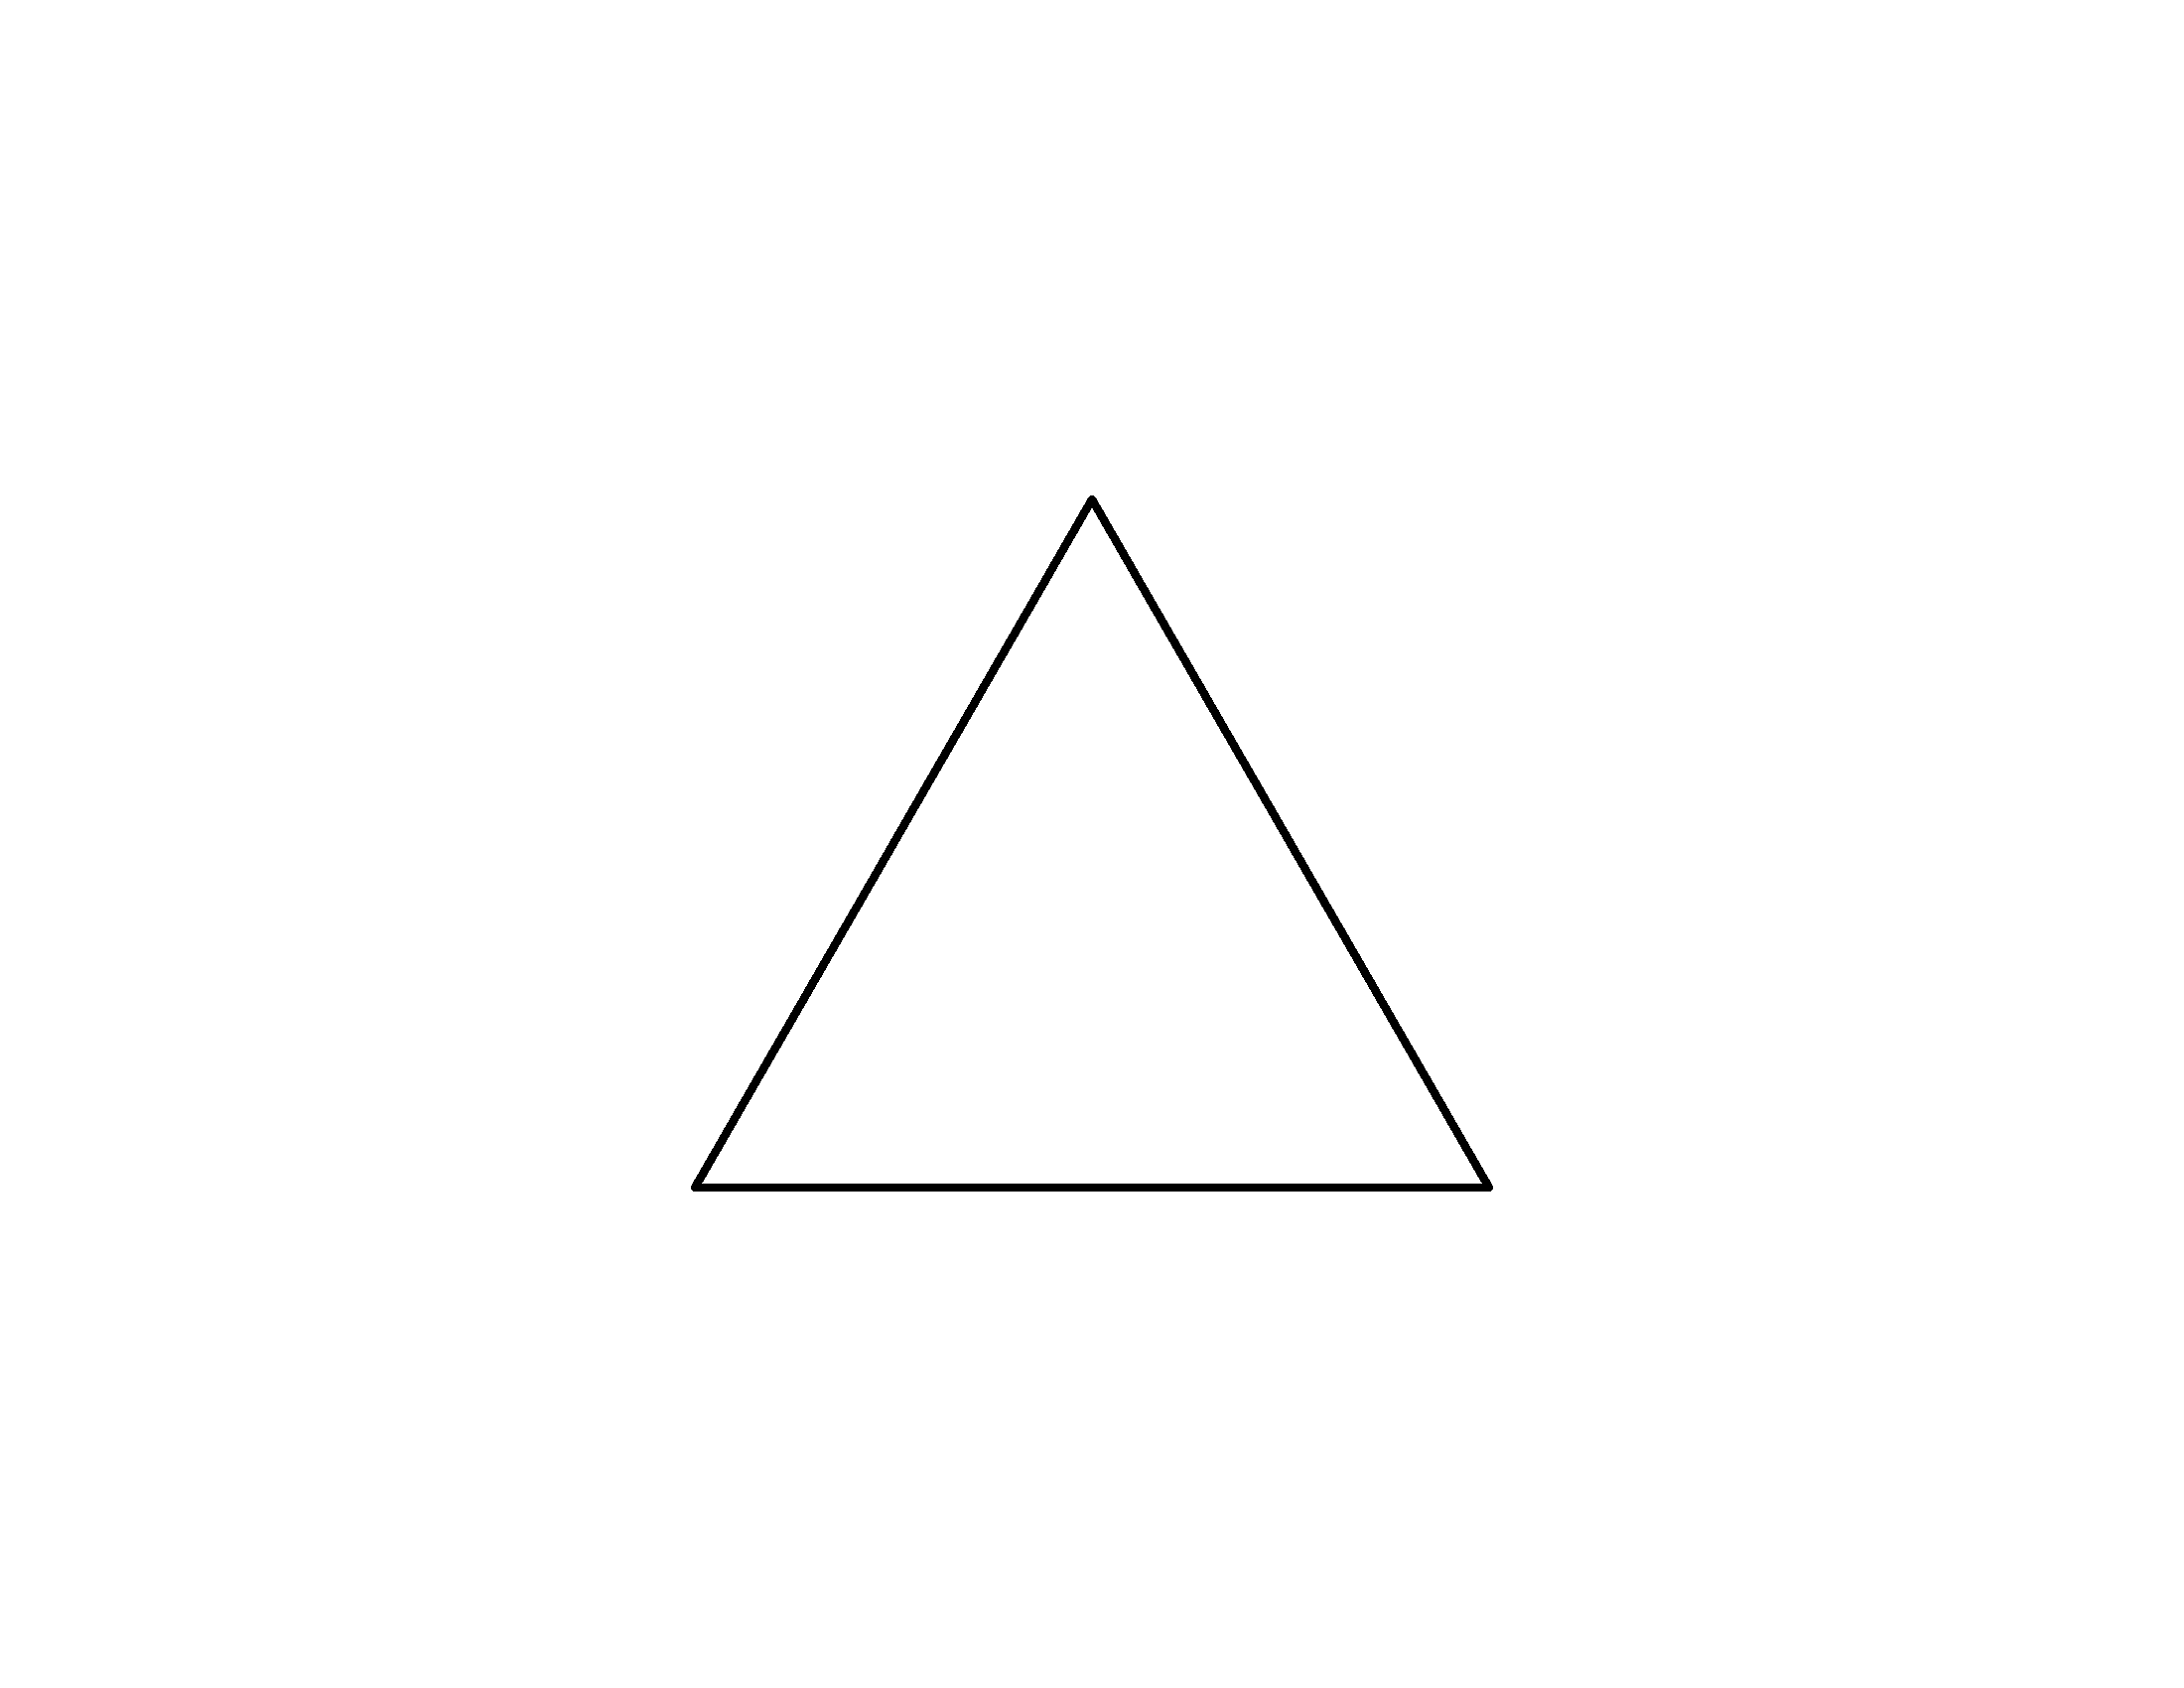 Equilateral Triangle button